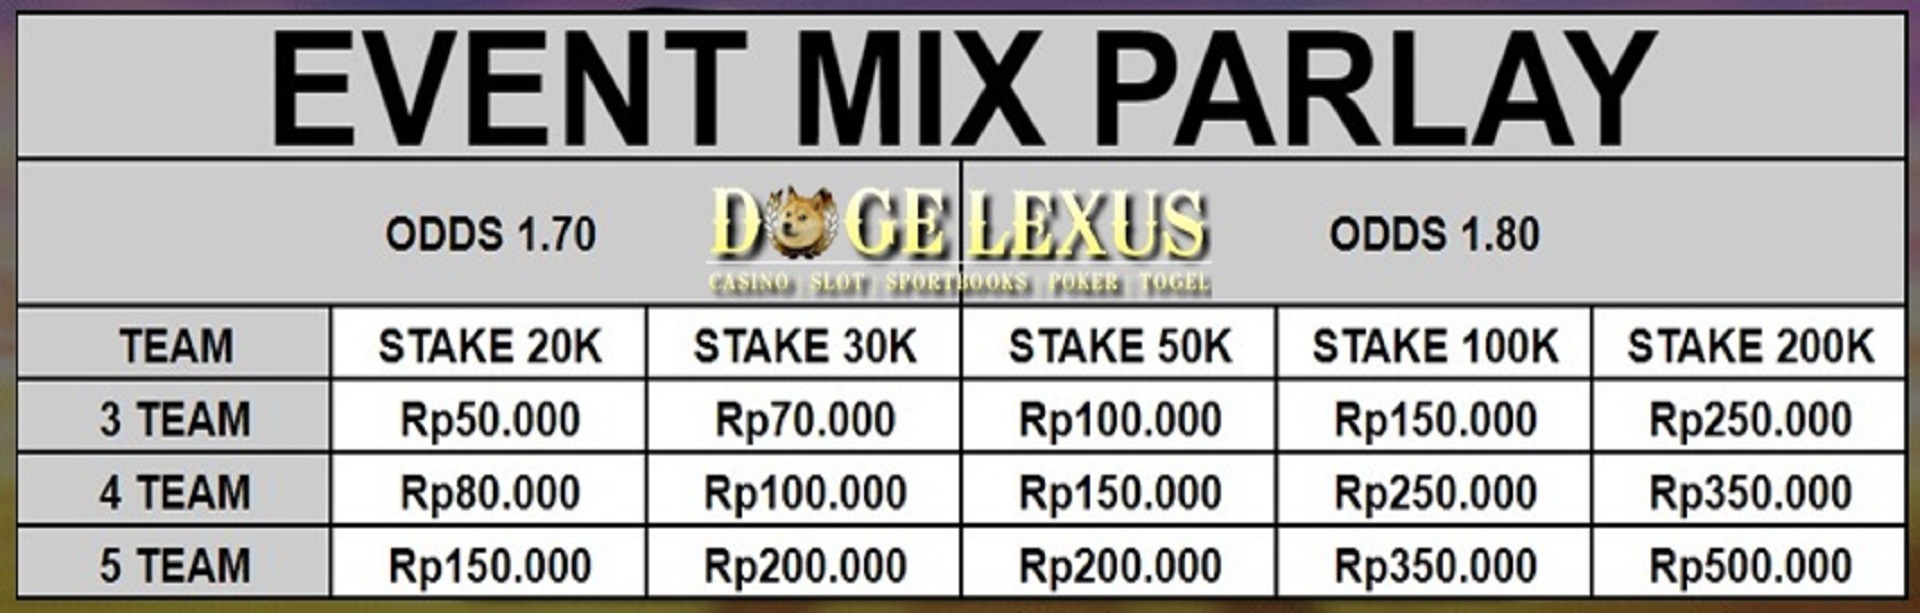 Event Mix parlay